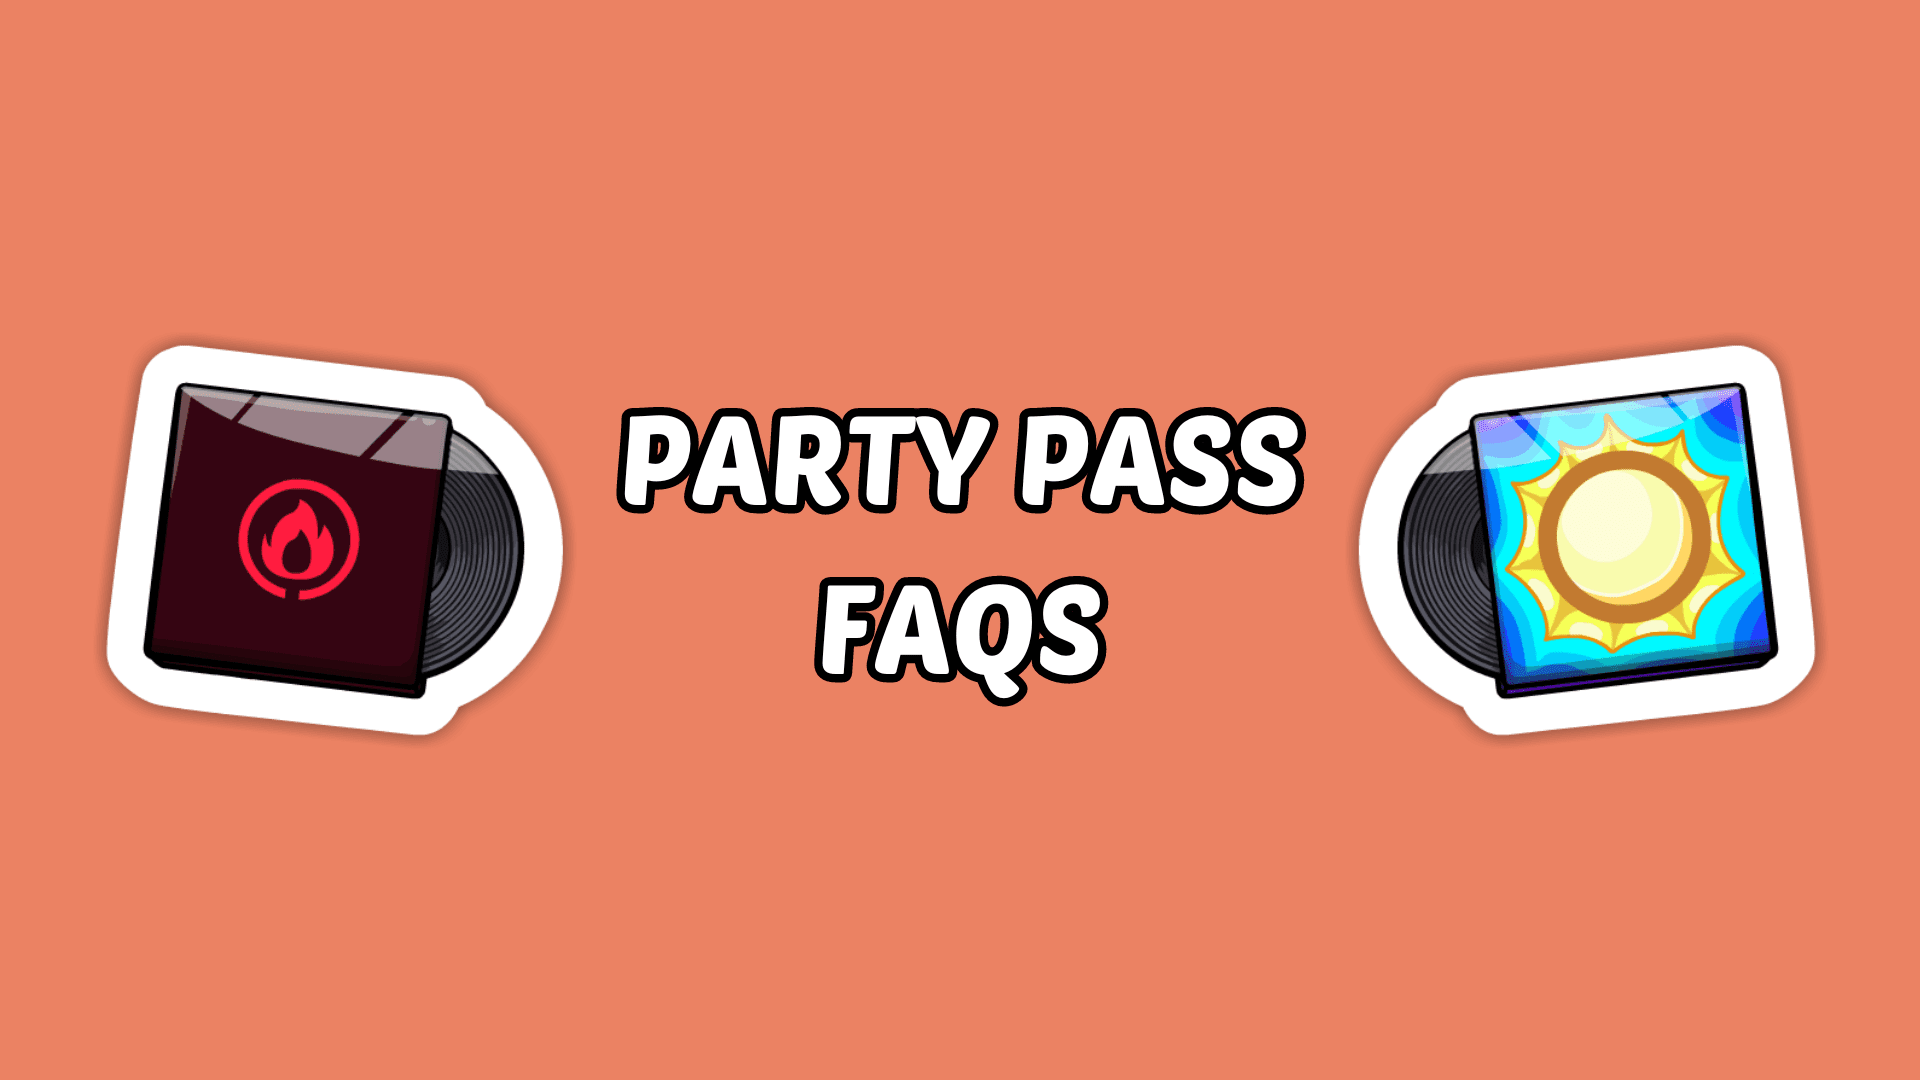 What is the Party Pass?